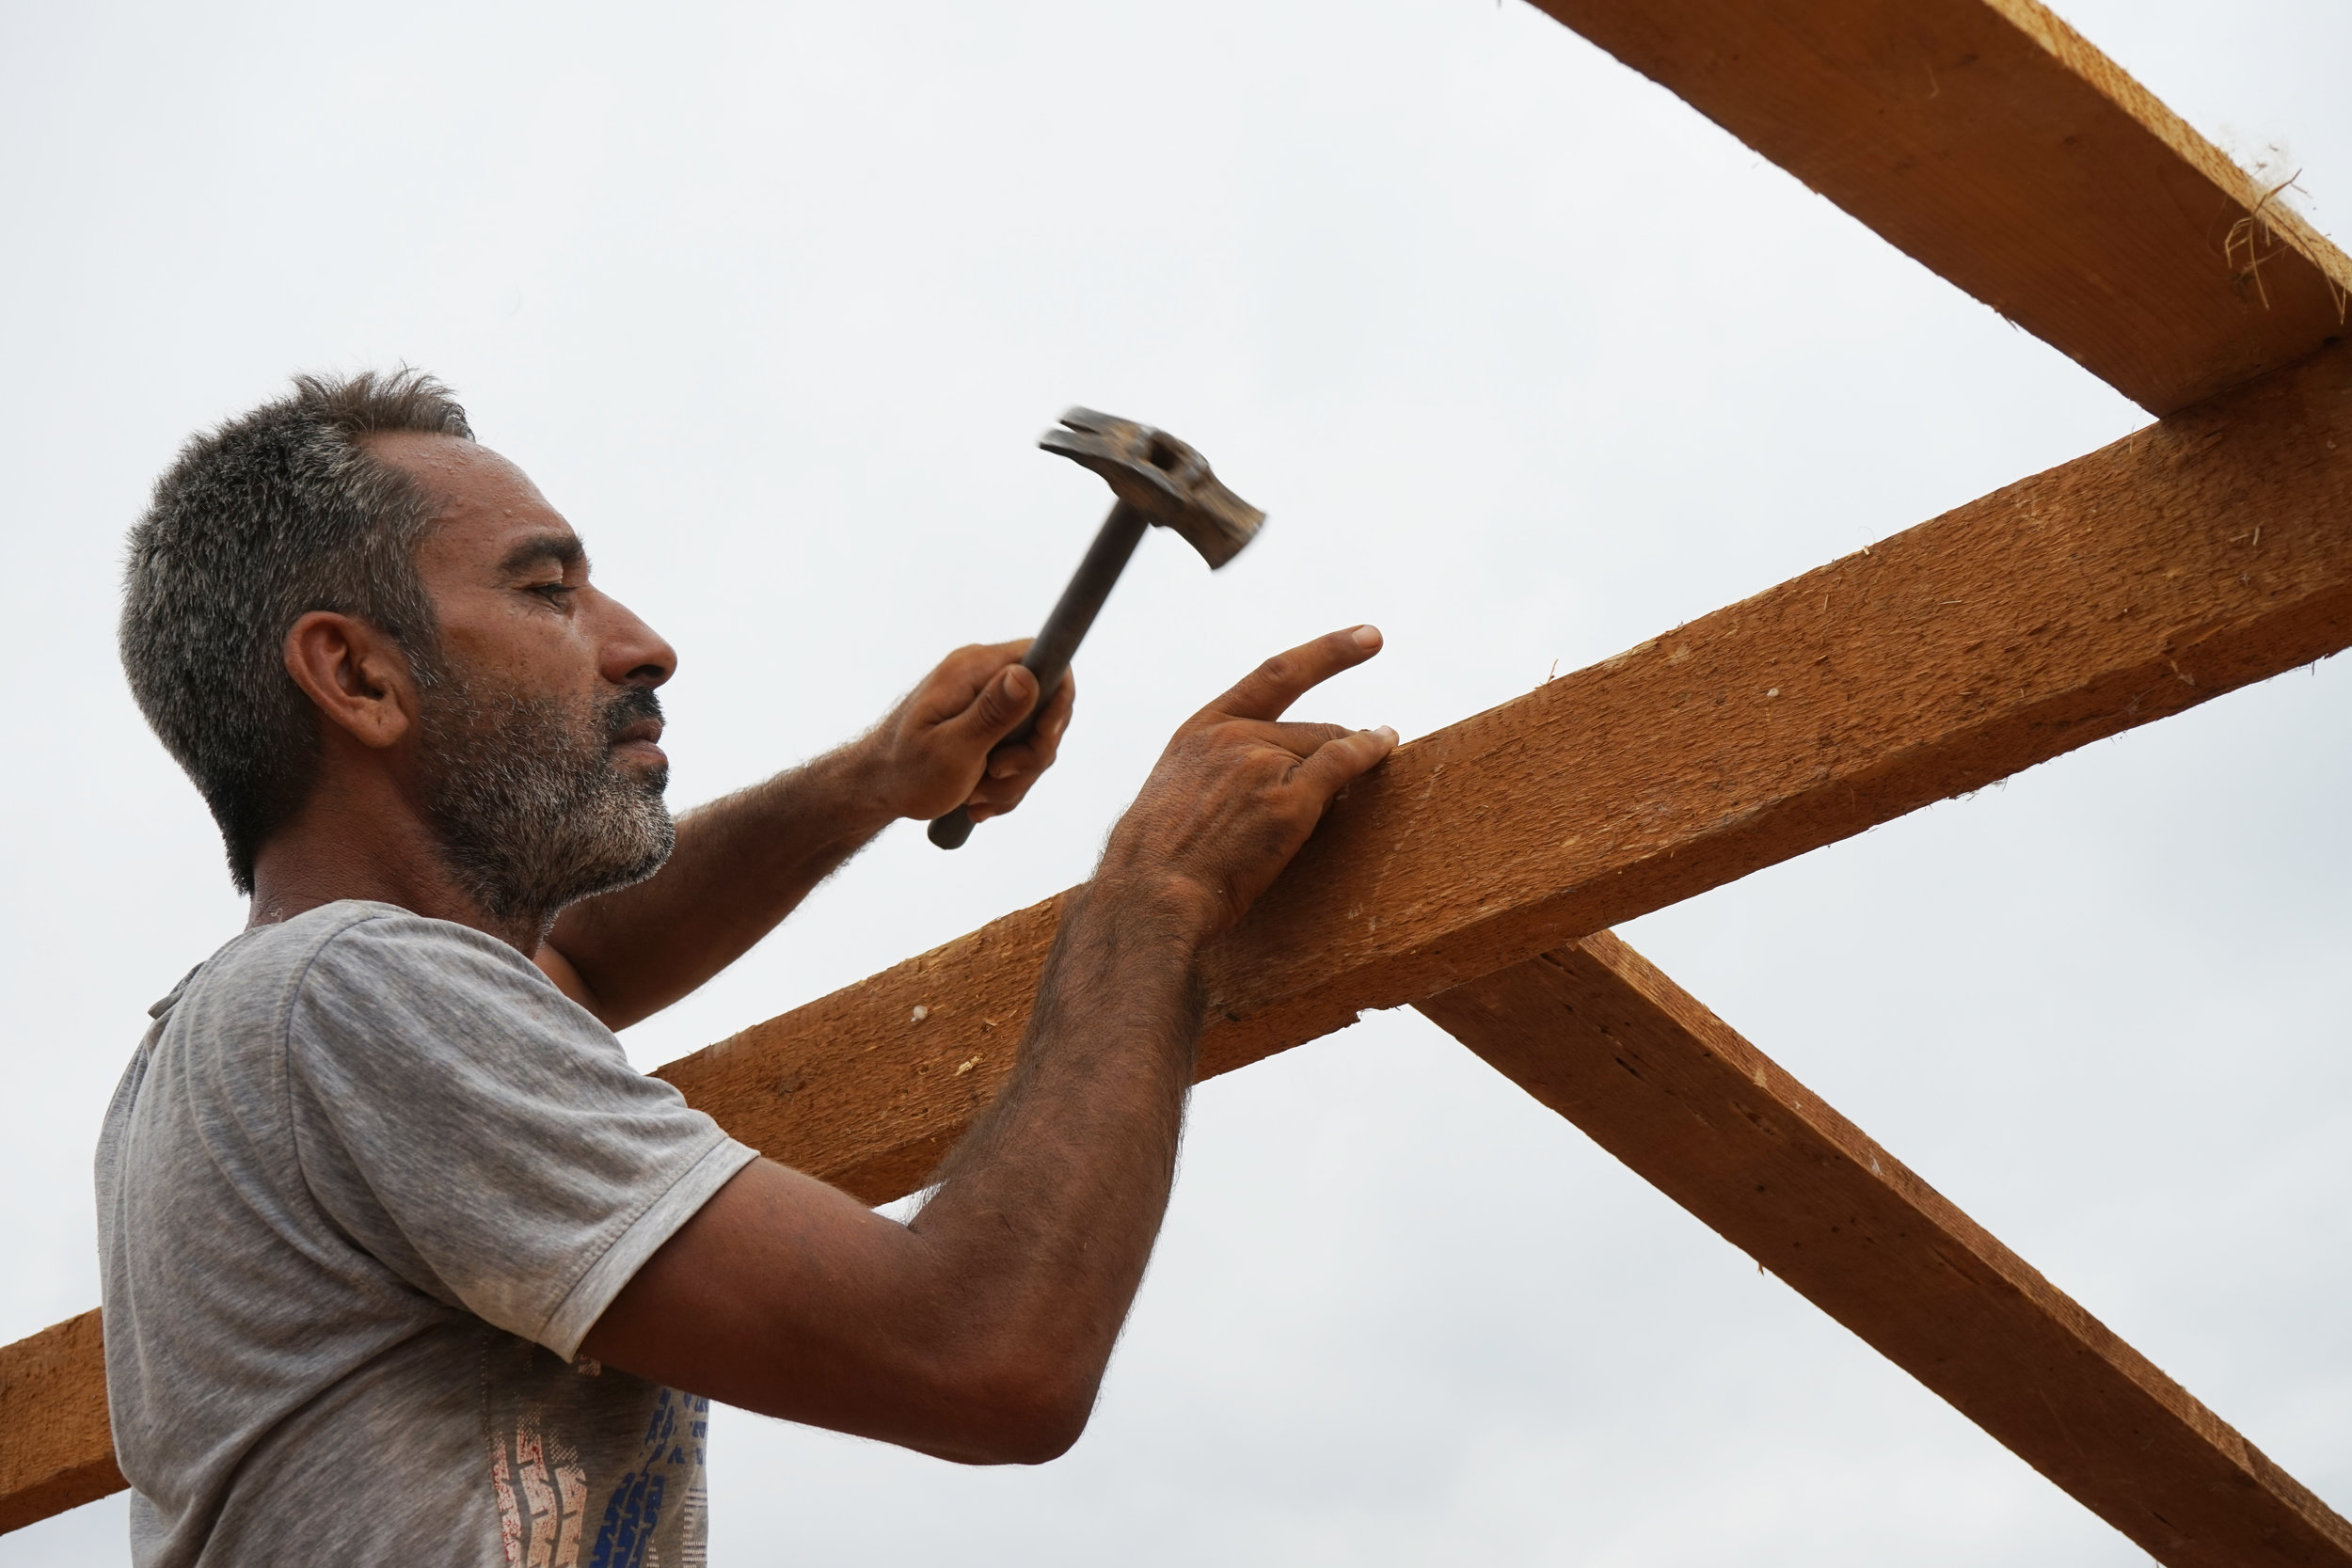  A man works on building the structure for a new tent in UNHCR Syrian refugee camp 054 in 'Akkar on August 24, 2016. 